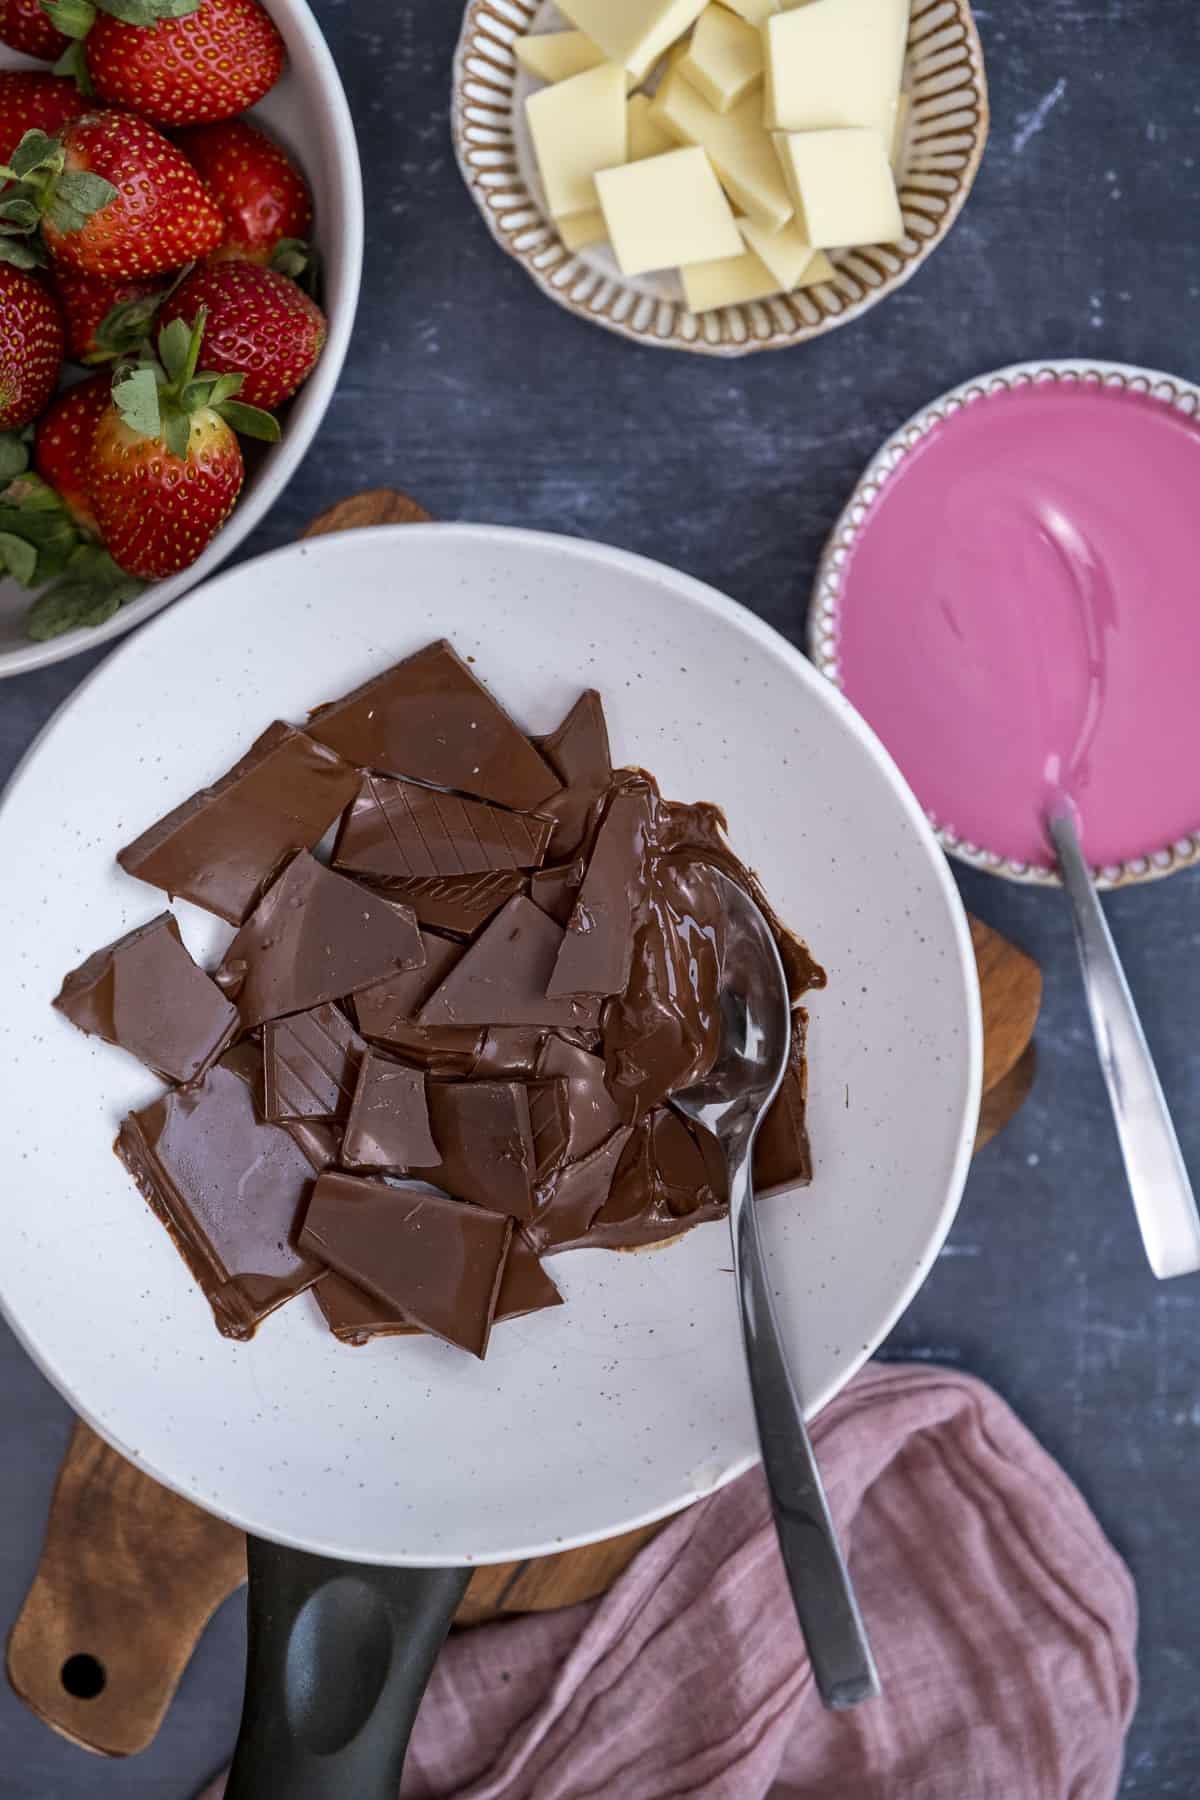 Dark chocolate melting in a white ceramic bowl over a saucepan, a spoon inside it, melted pink and white chocolate and strawberries on the side.